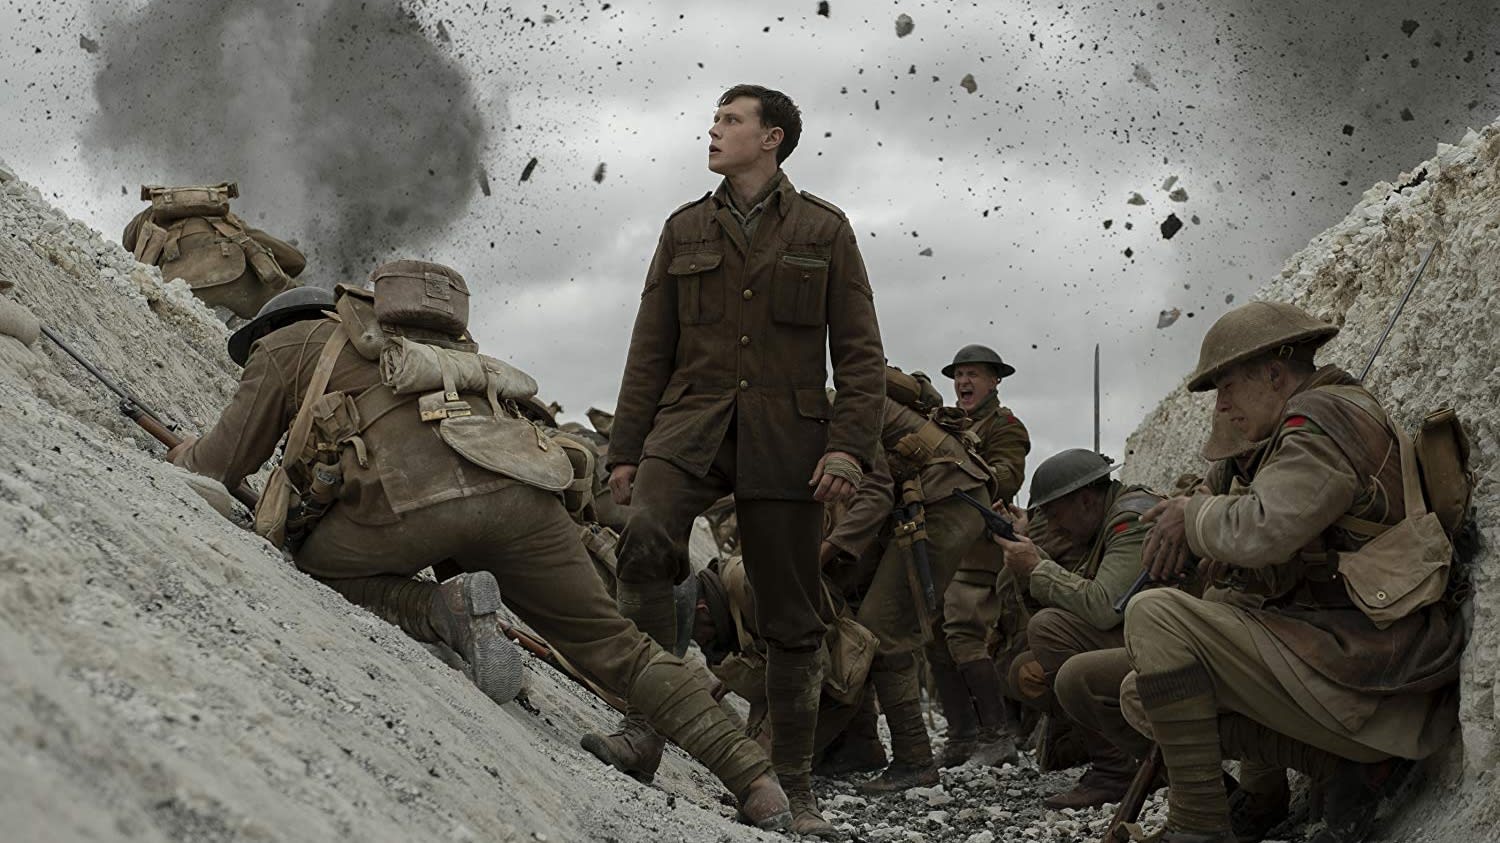 ‘1917’ soars to $36.5 million opening after Golden Globe win